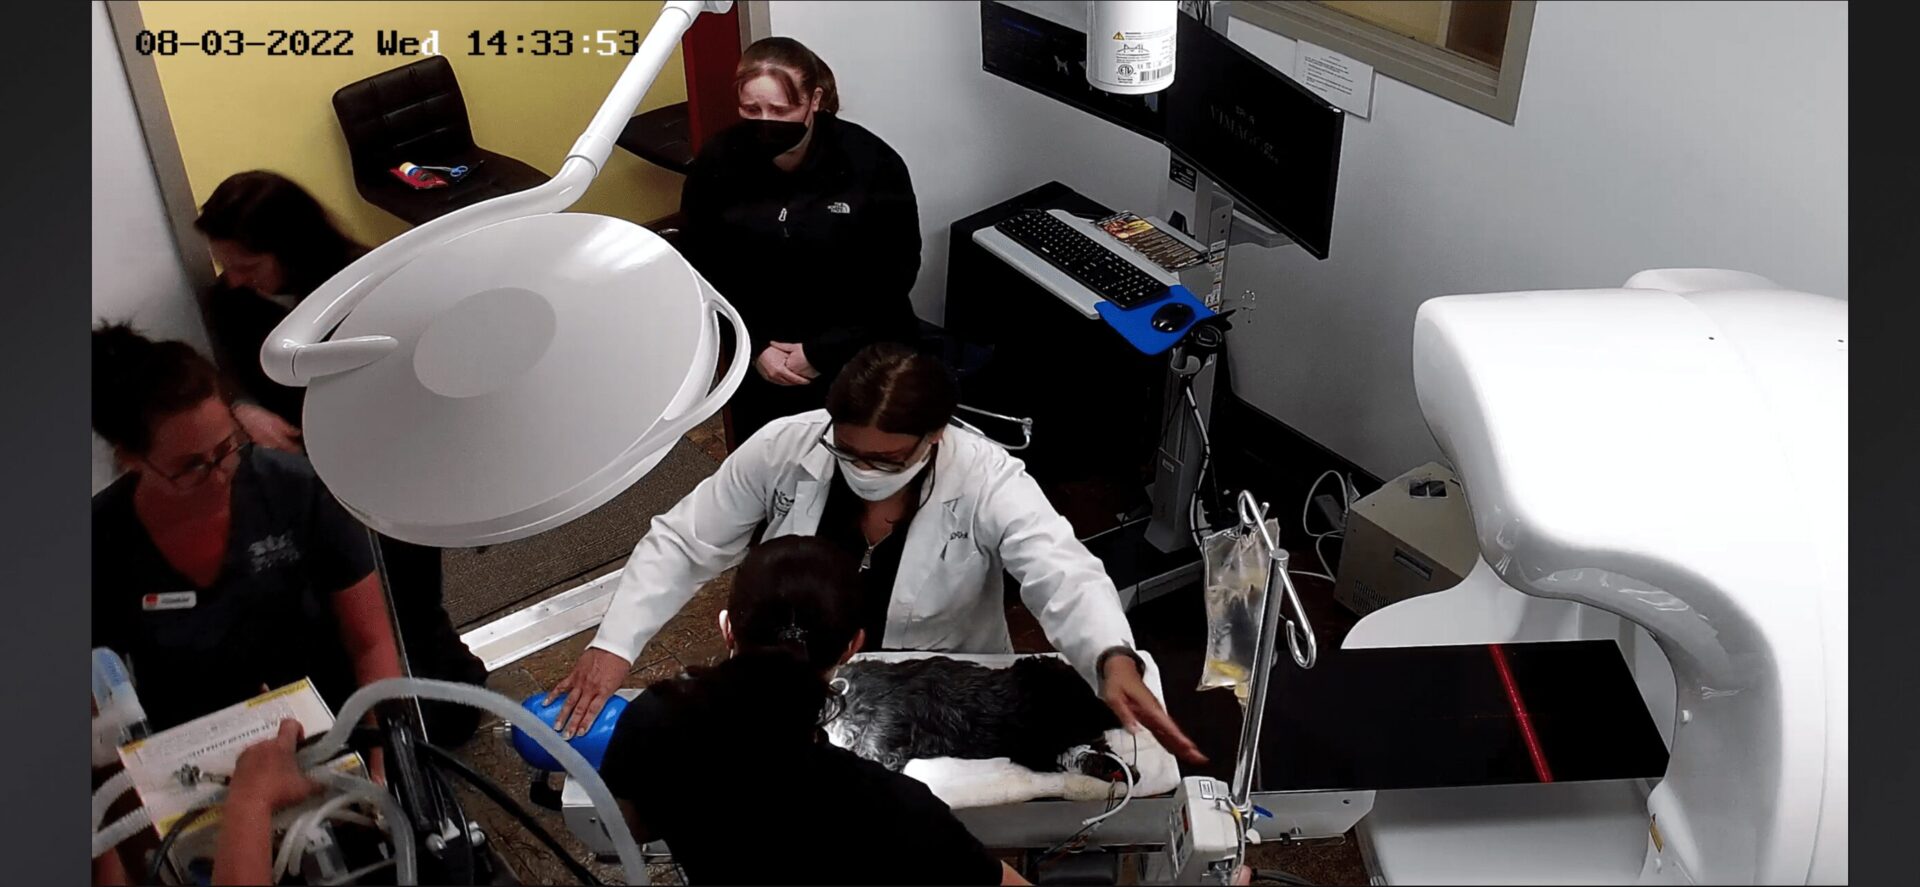 A CCTV camera picture of a doctor treating a dog